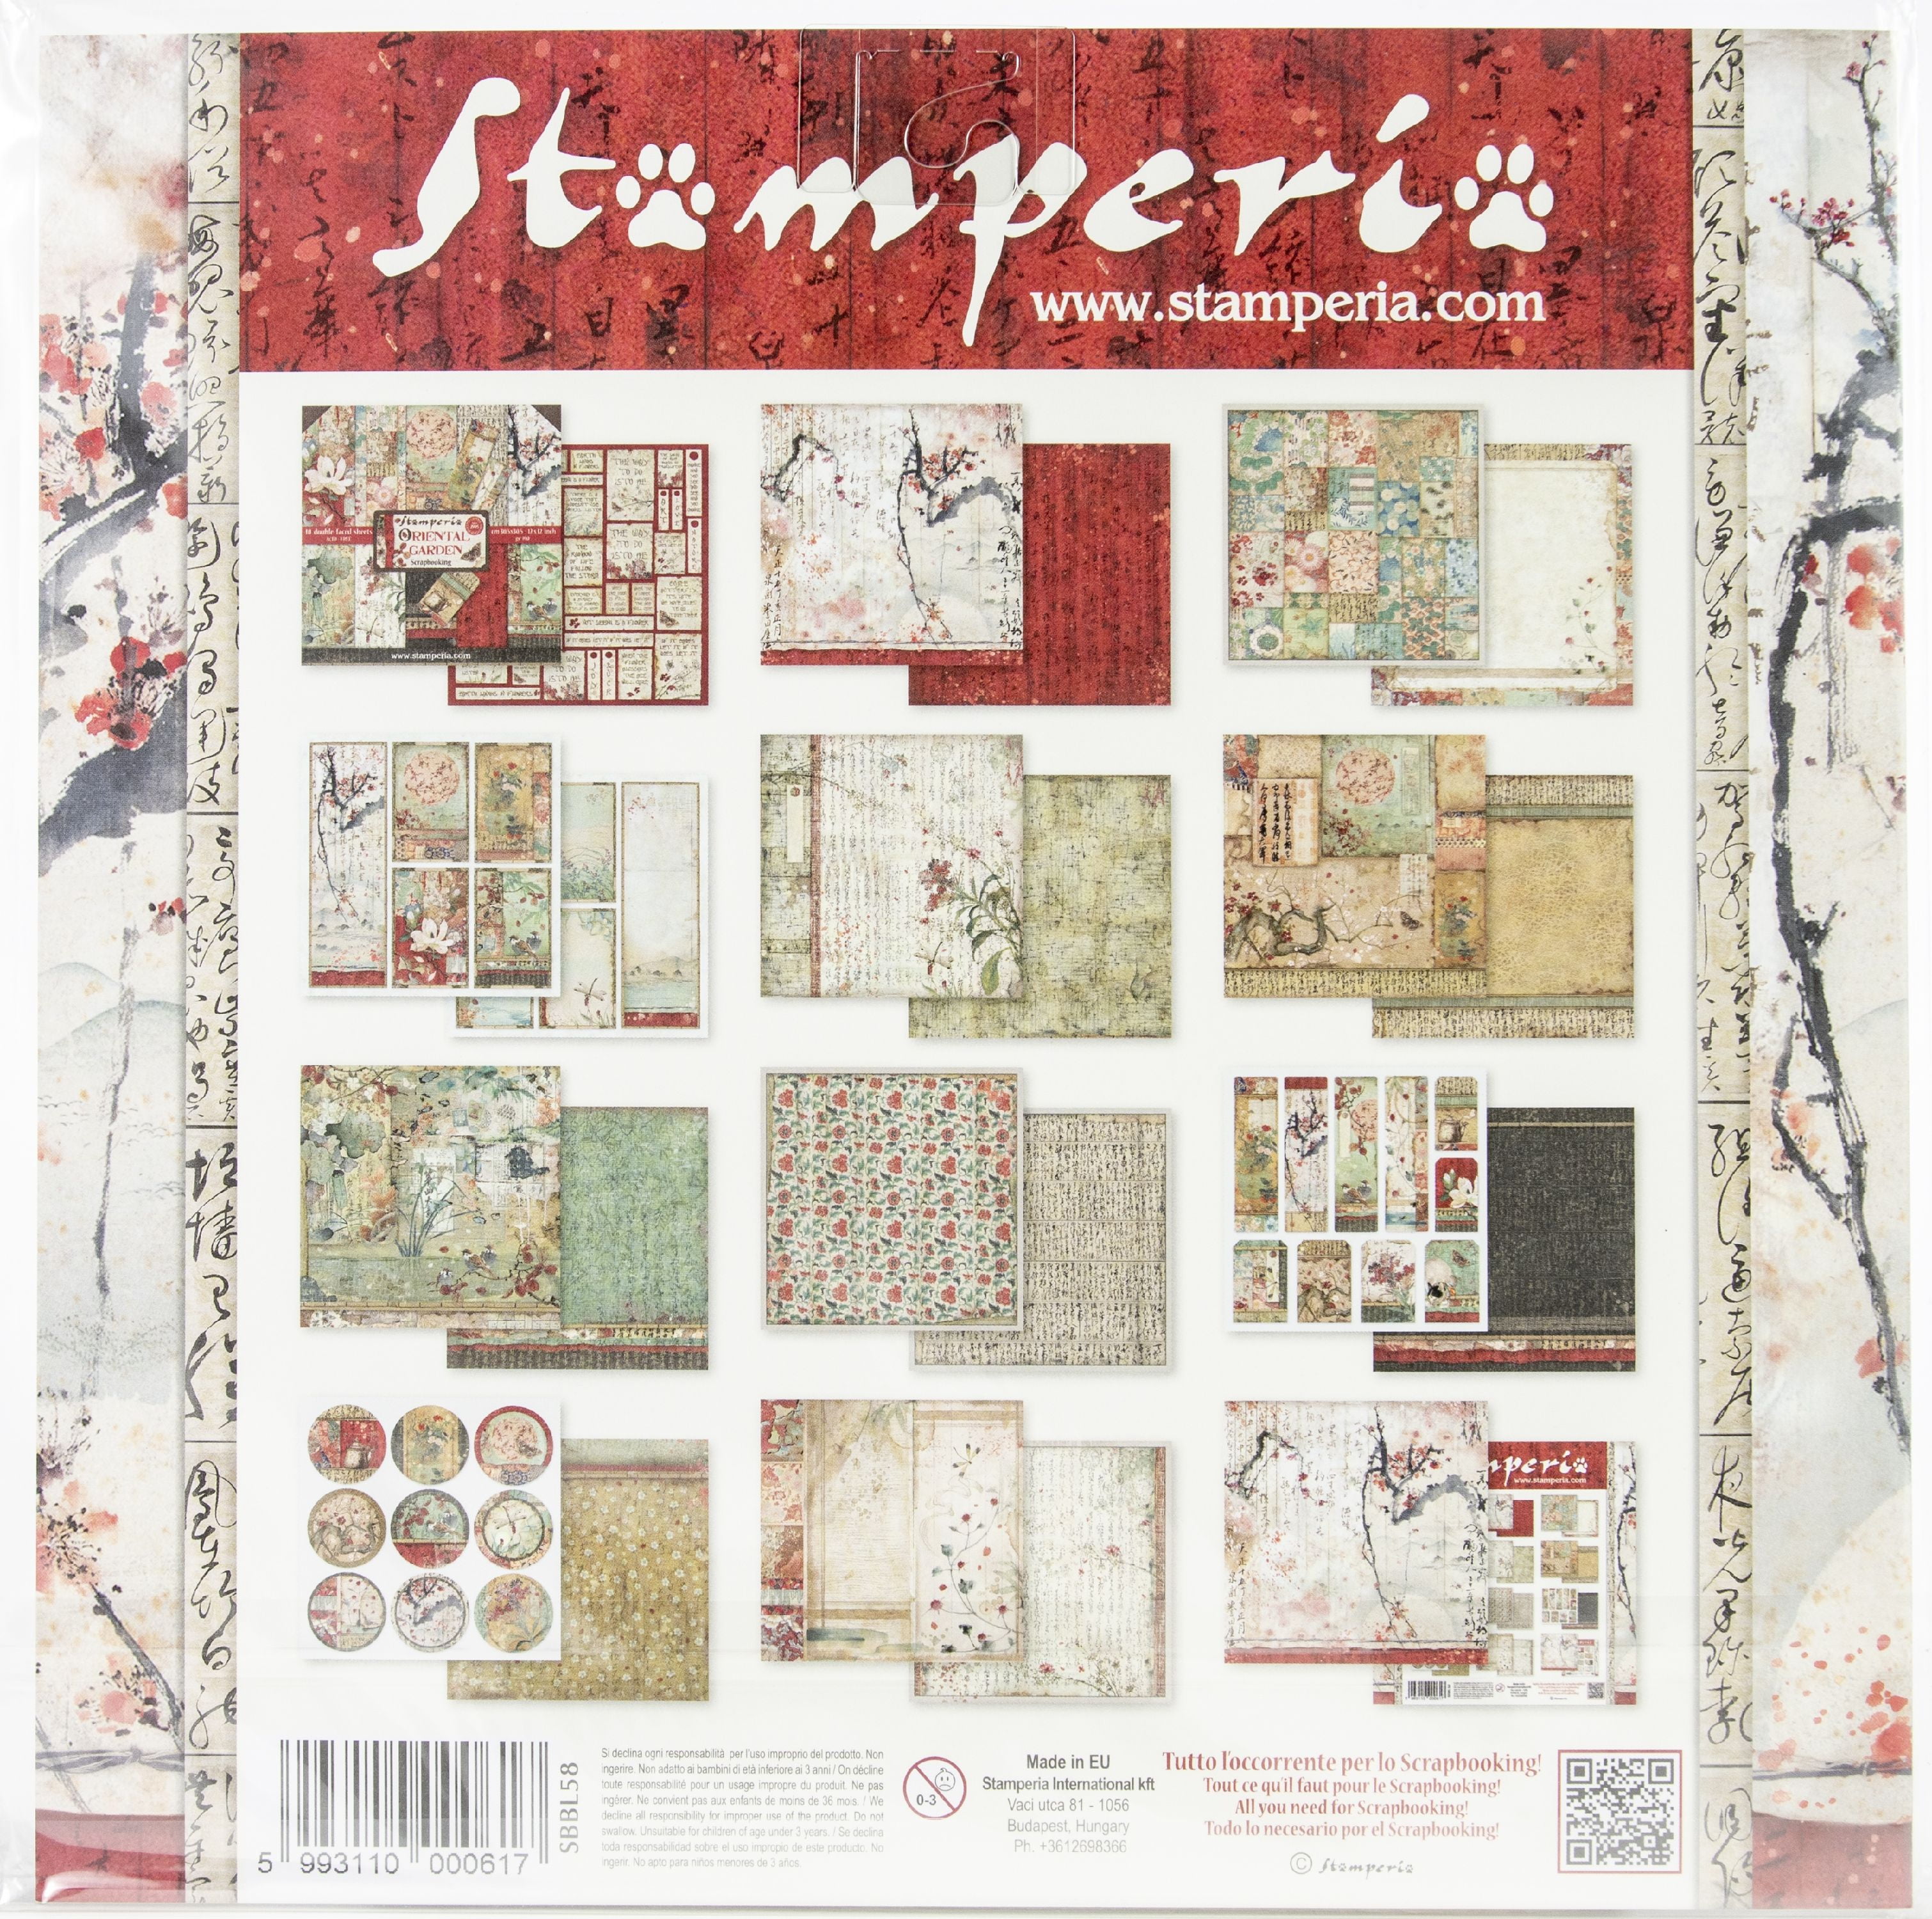 Japan Scrapbook Paper: 12 Pieces Double Sided Scrapbook Paper For